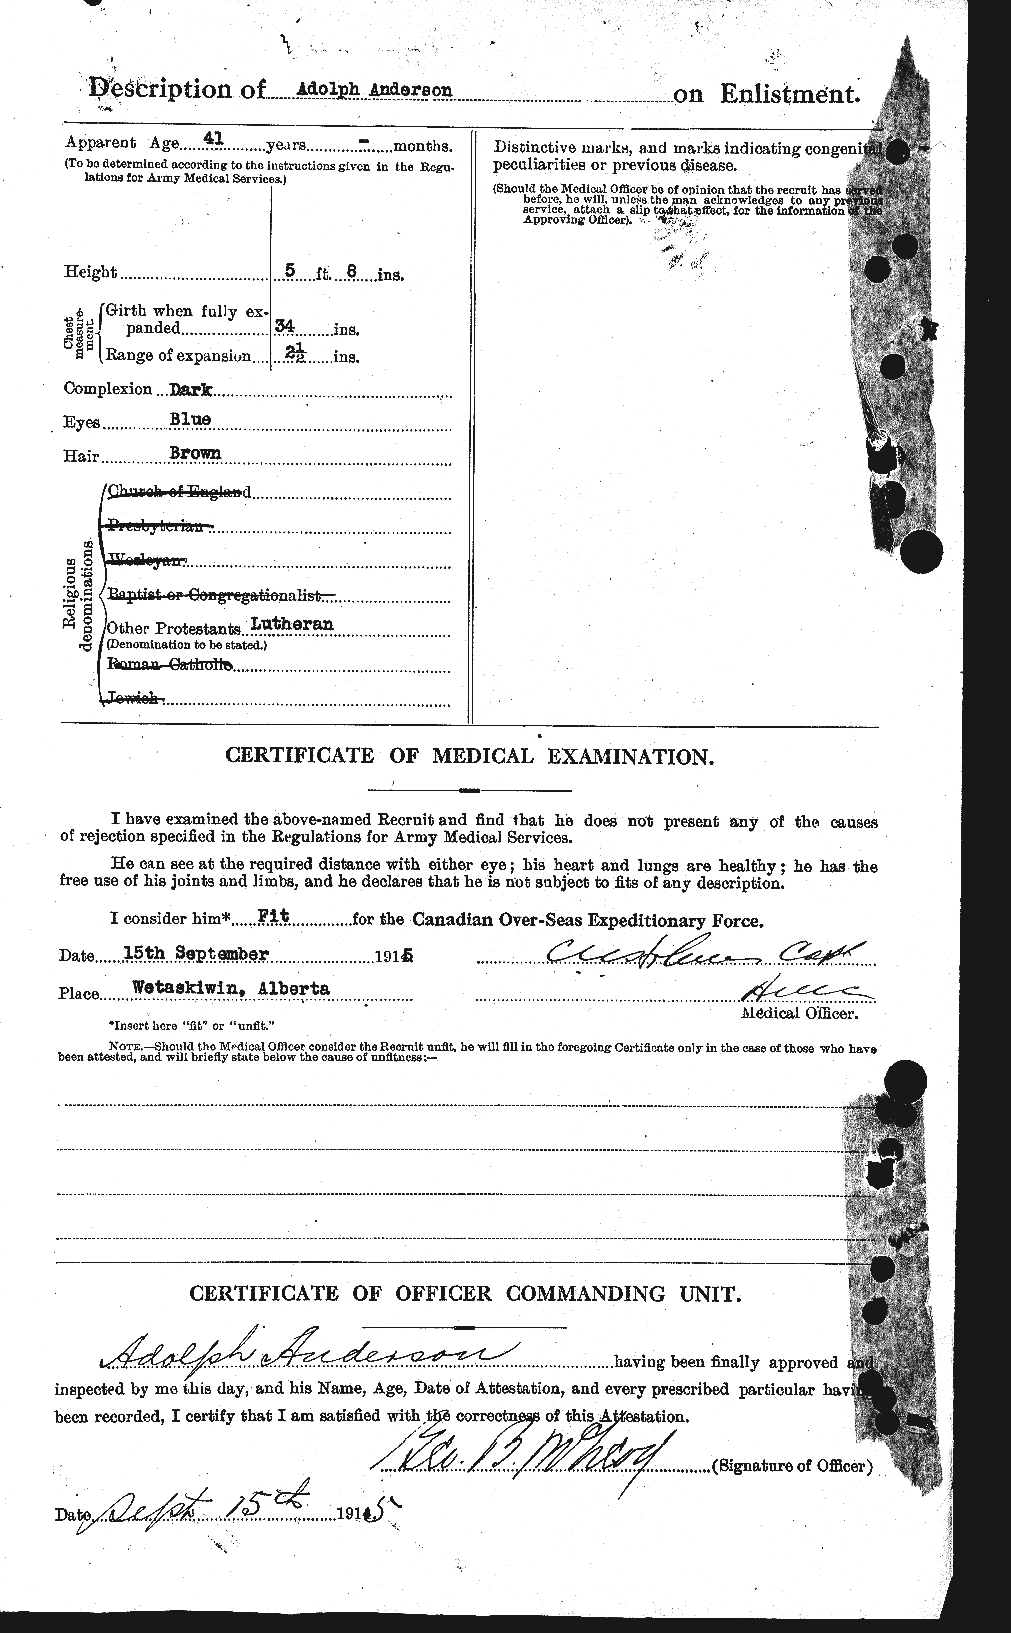 Personnel Records of the First World War - CEF 209575b